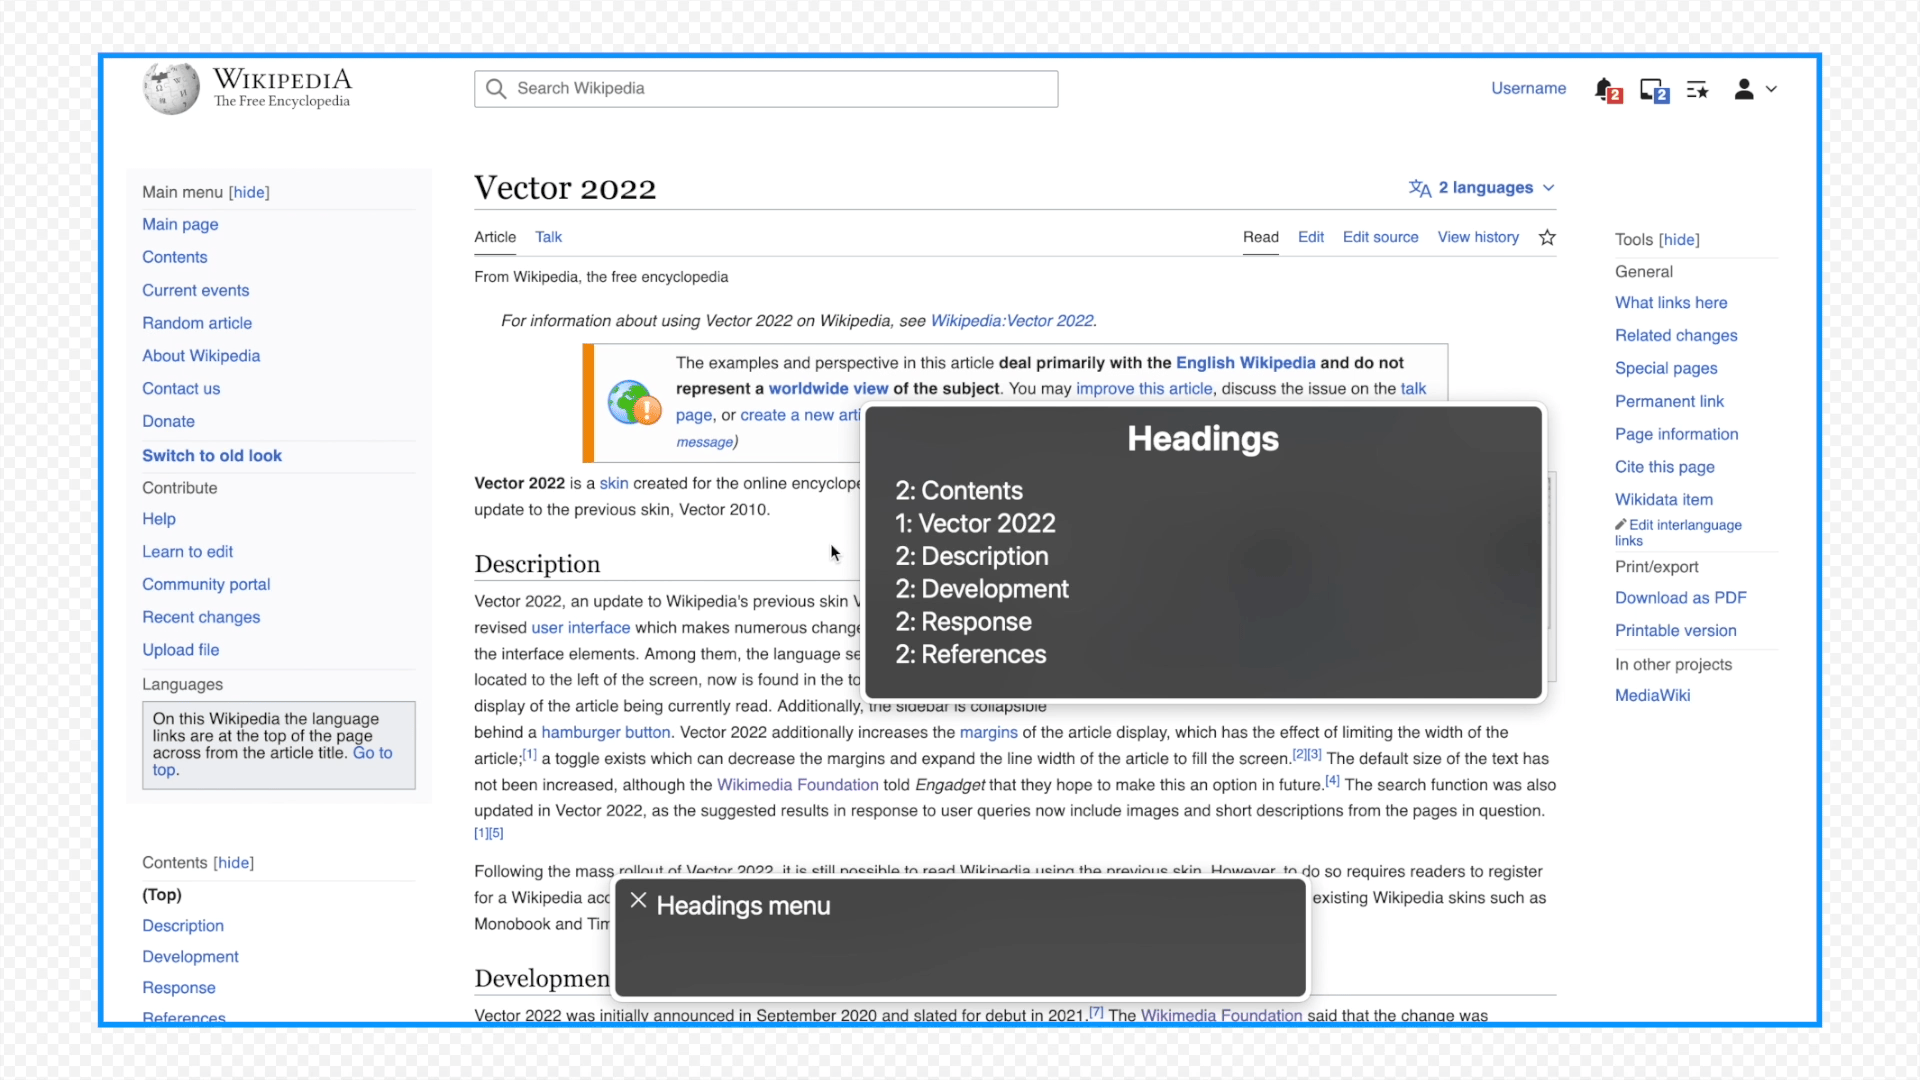 How the new Wikipedia design focused on accessibility